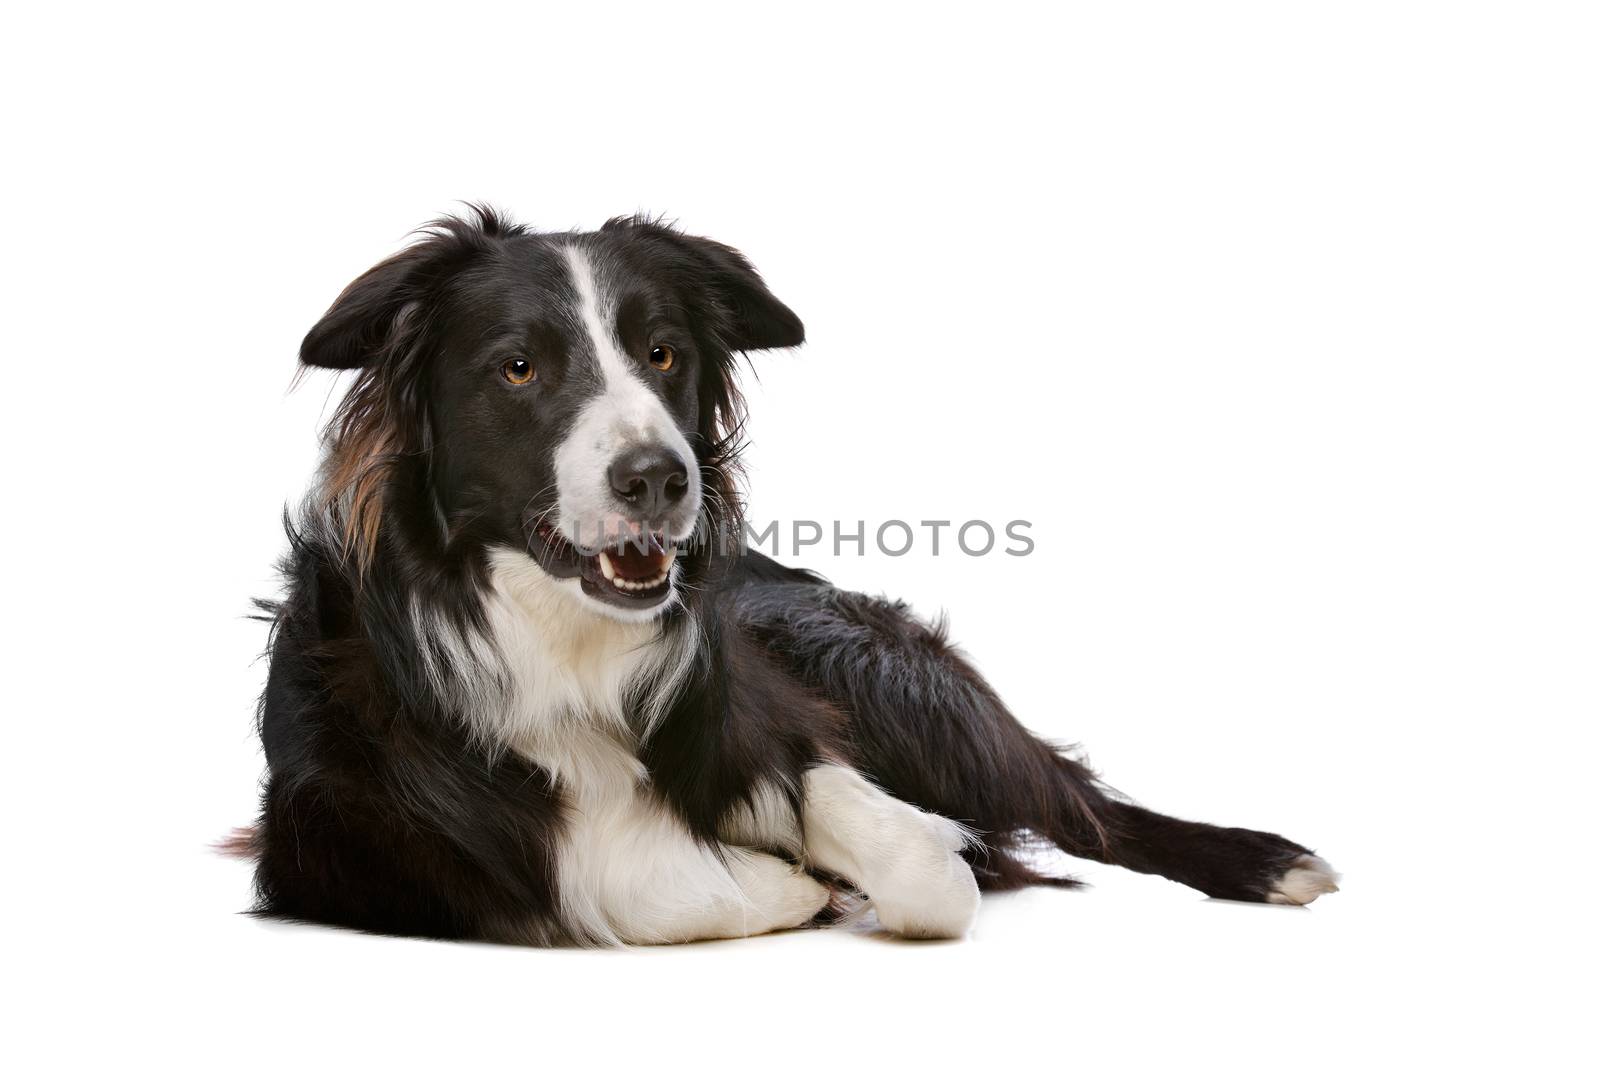 Black and White Border Collie dog in front of a white background